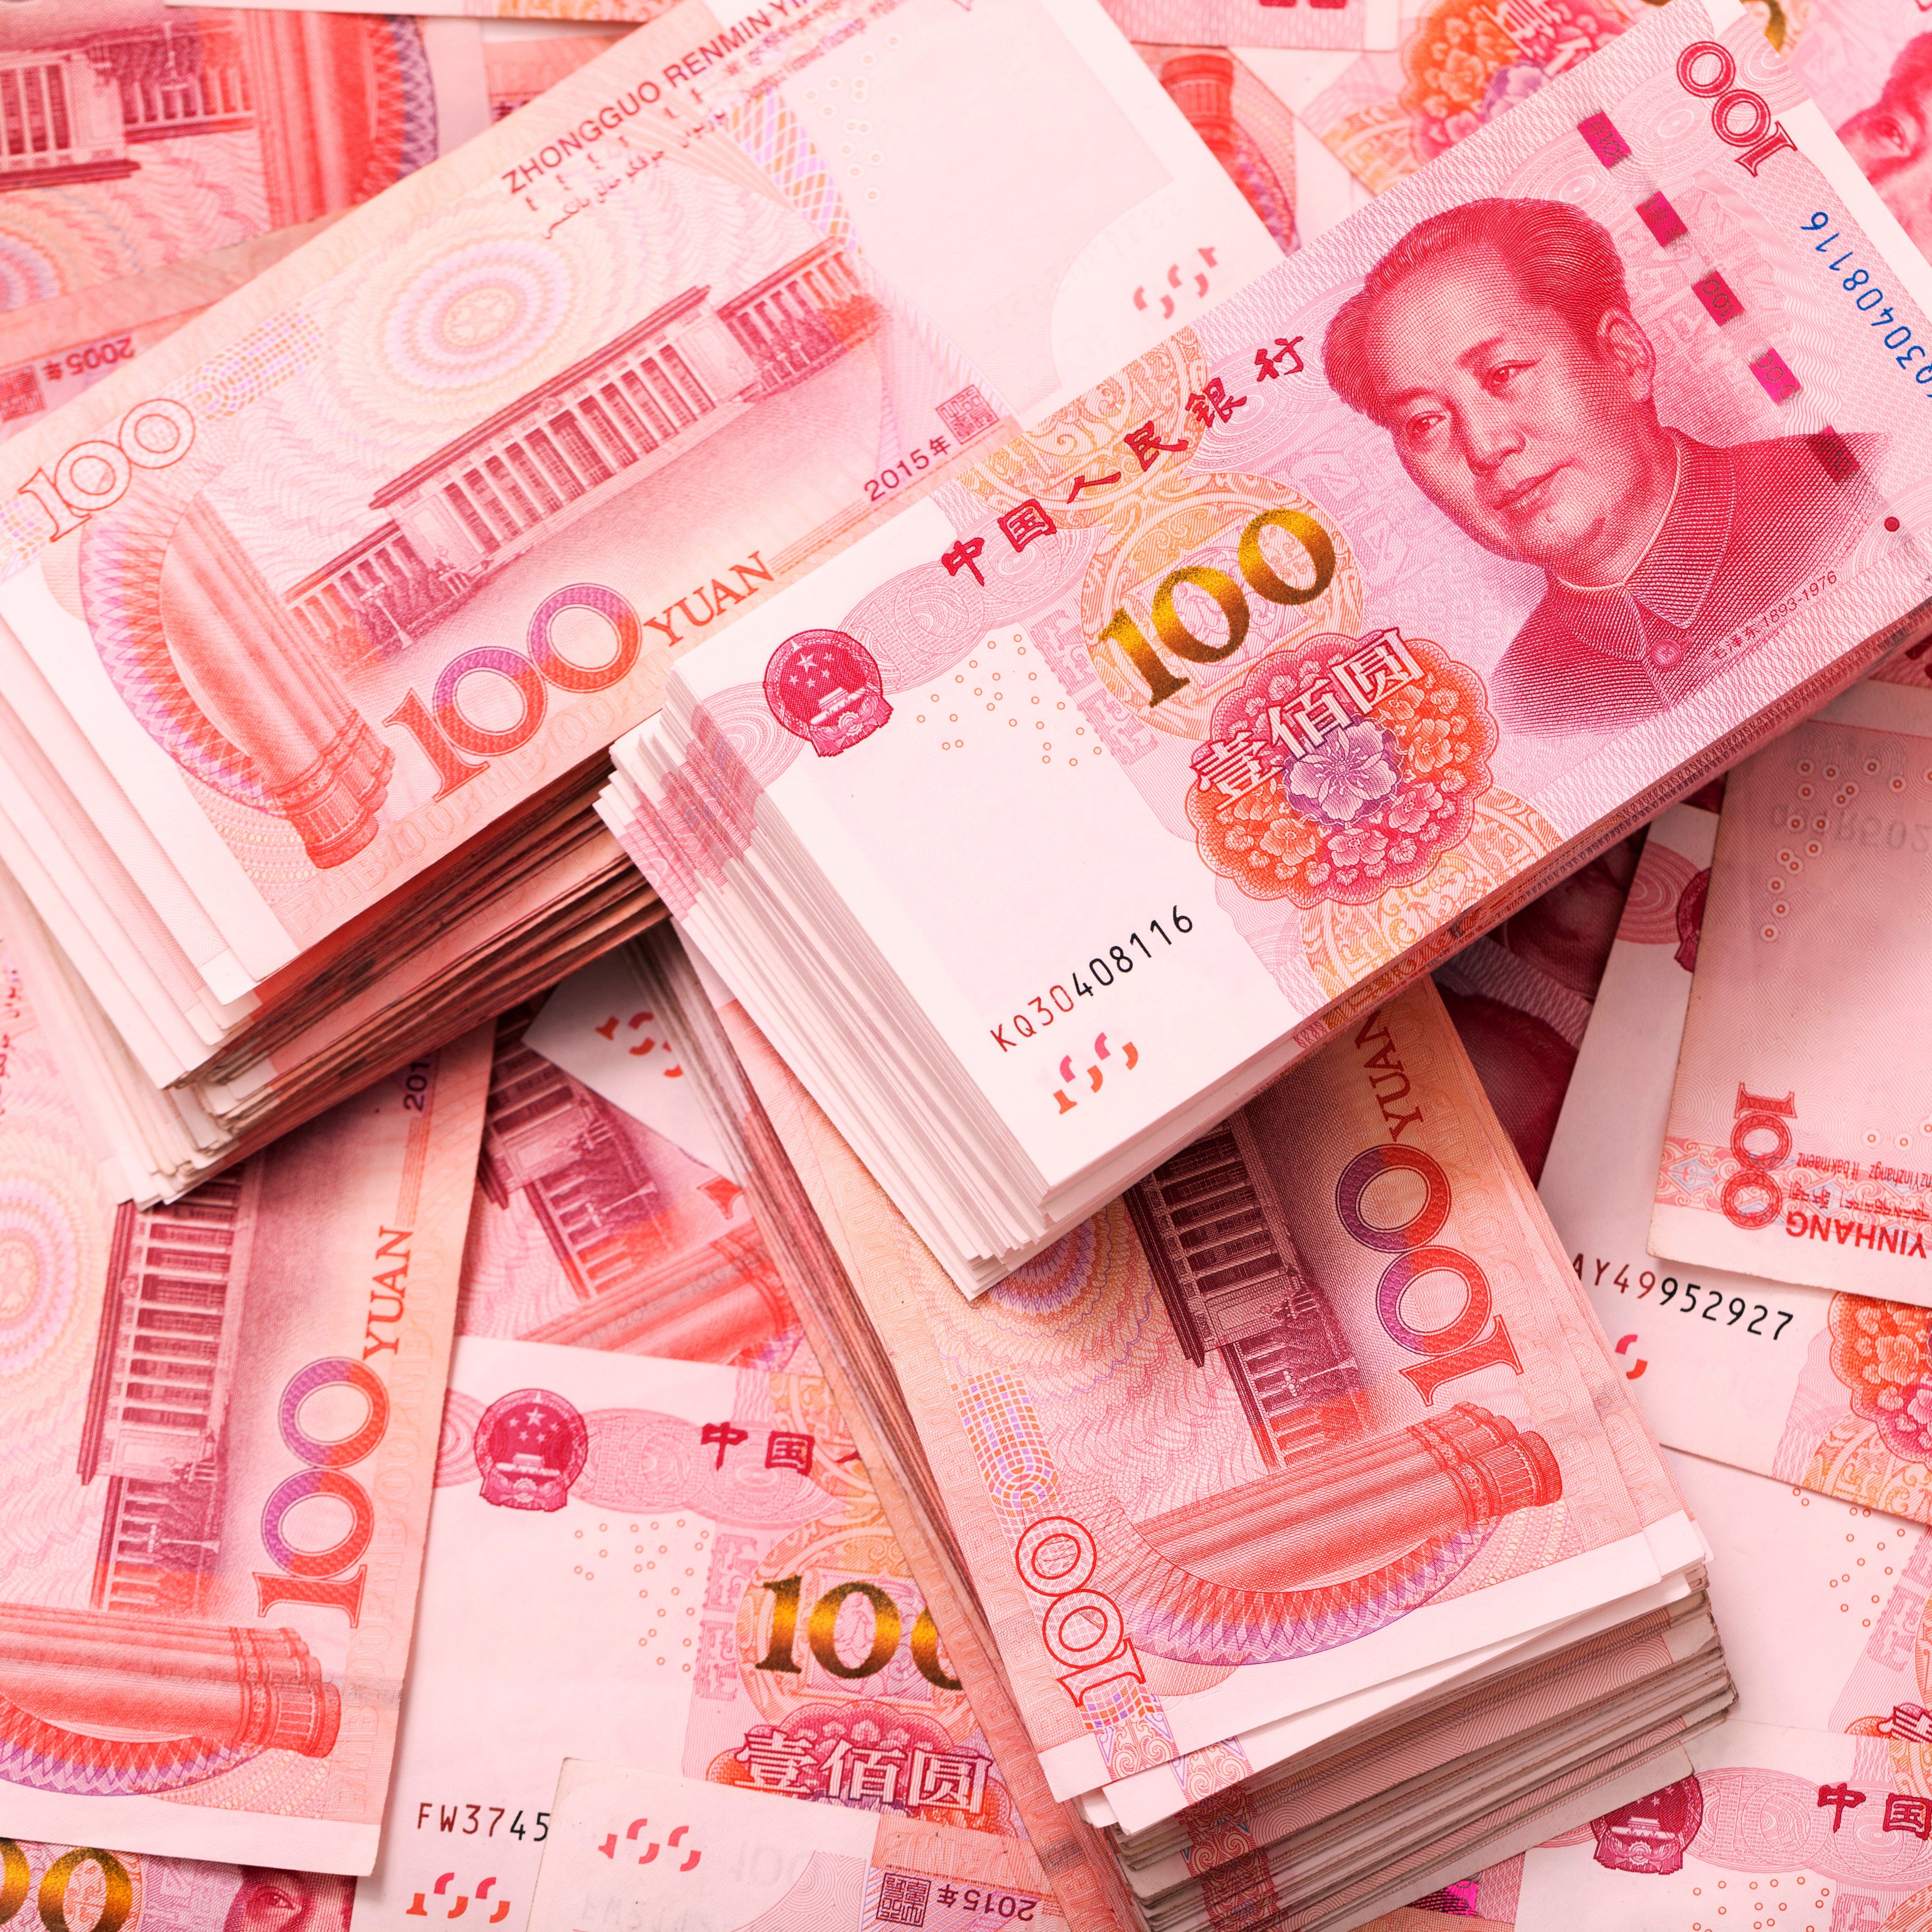 A Uruguayan official in China says his country will use the yuan to settle some trade in the future. Photo: Shutterstock